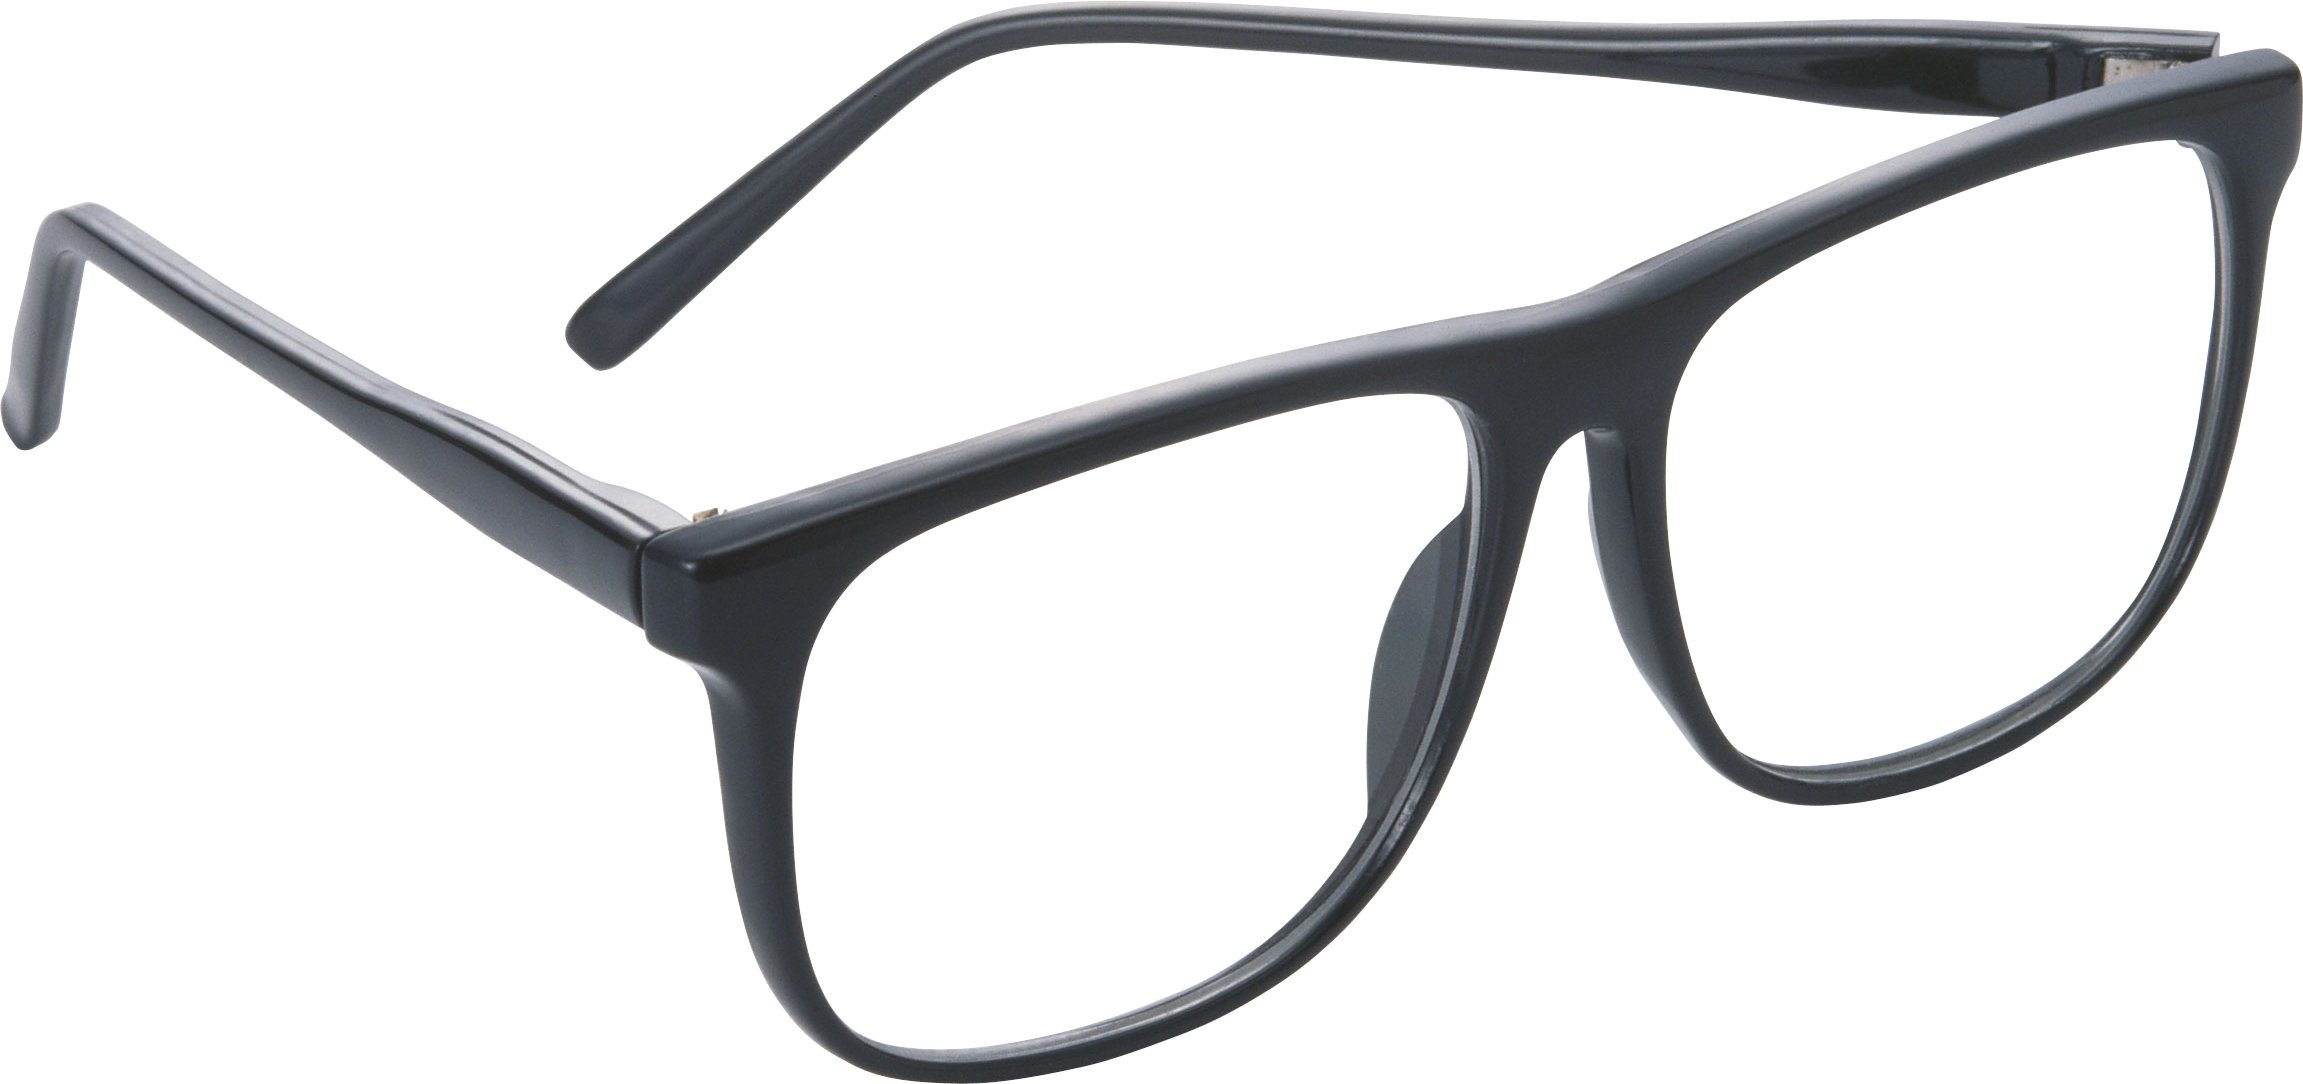 Glasses PNG Background